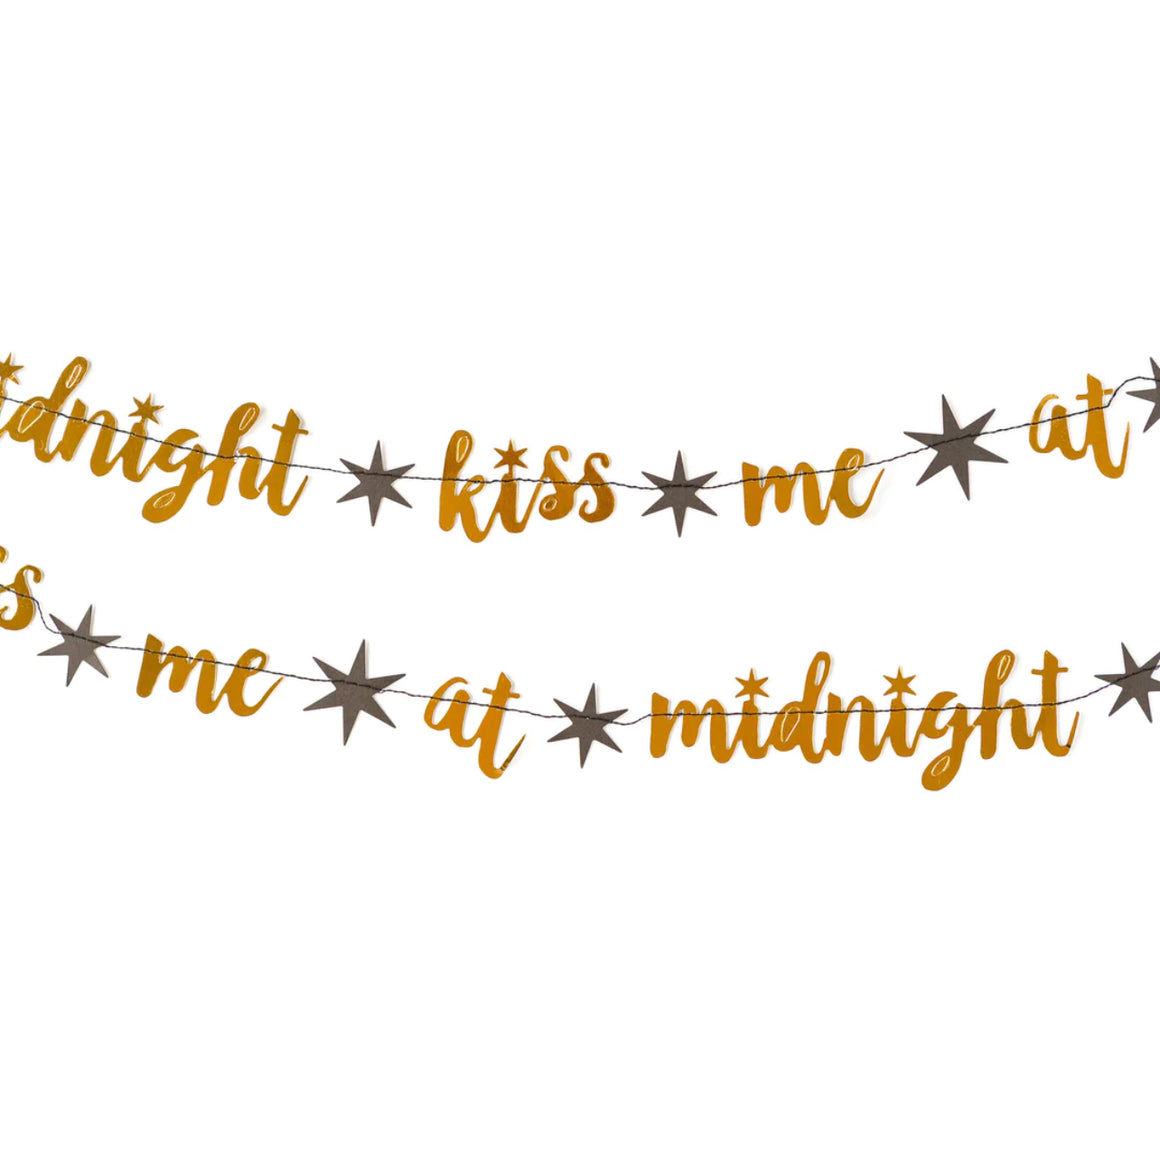 BANNER - NEW YEAR’S EVE KISS ME AT MIDNIGHT